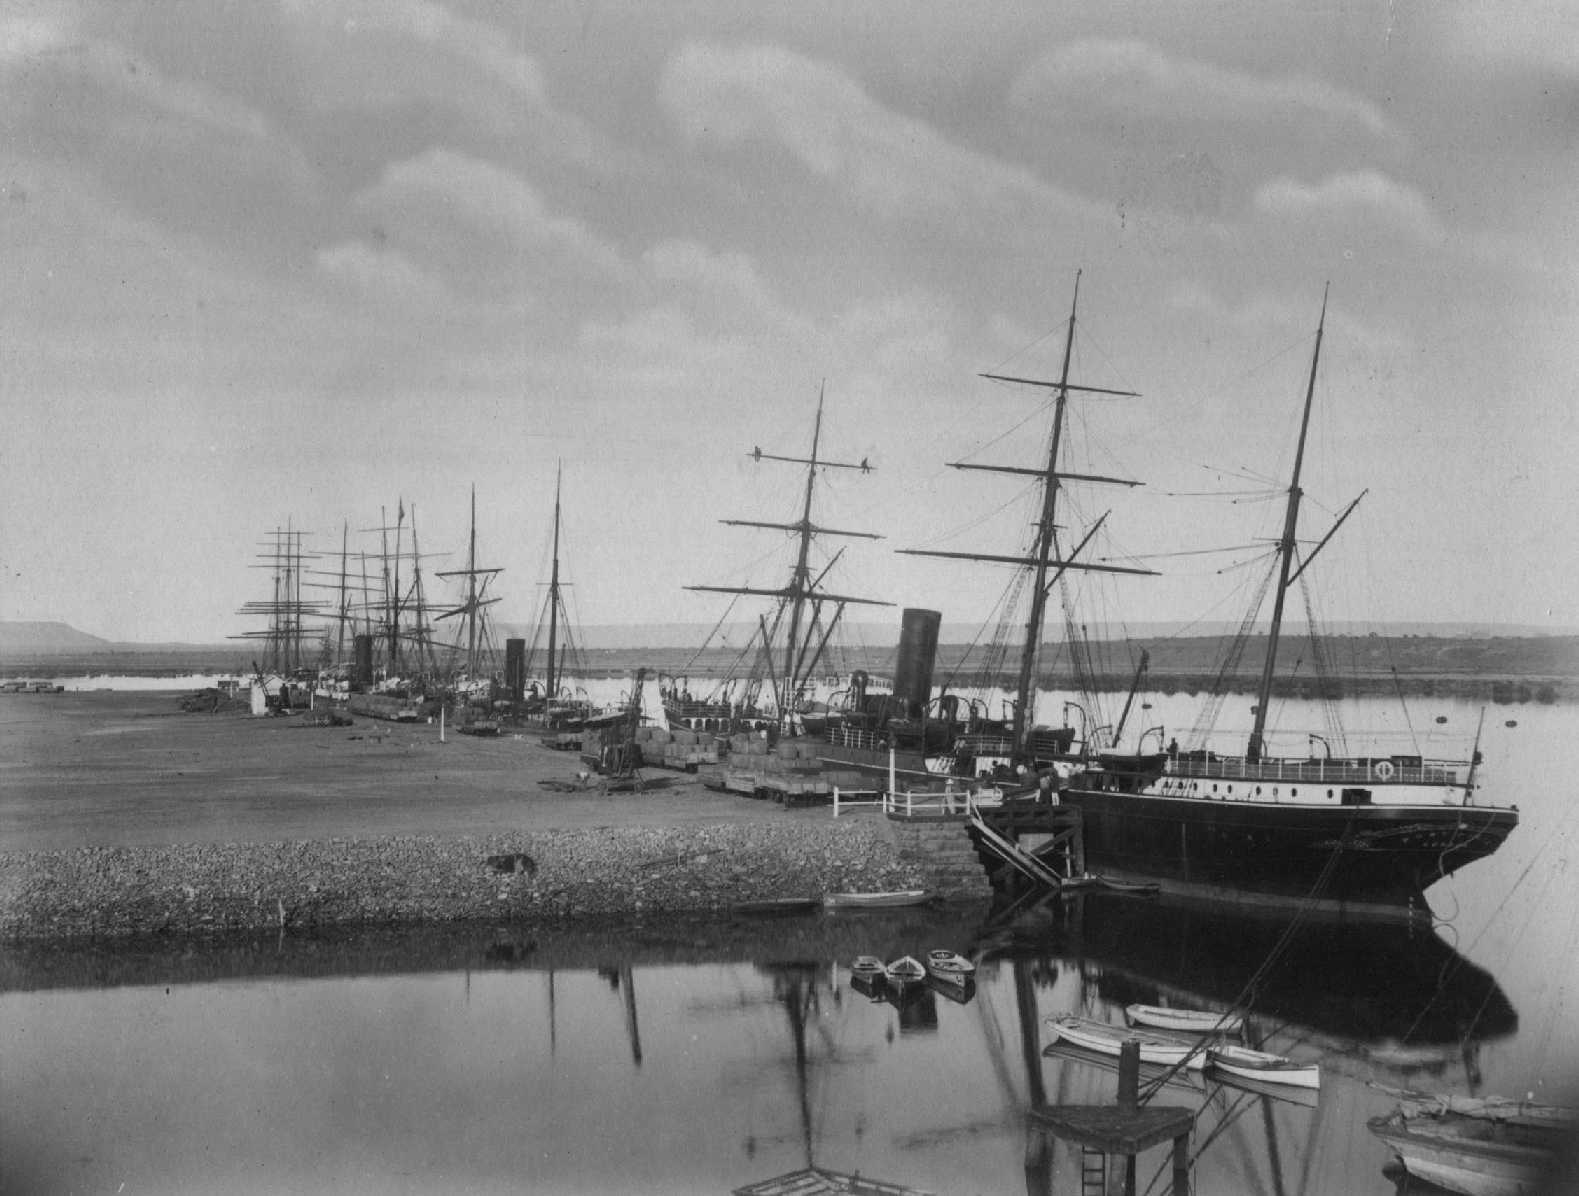 Barque "Rohilla" built in 1865 by A Stephen & Sons - Glasgow.  Owned by L.F. Mathies & Co.  Master - P Breckwoldt.
Tonnage:  985 comp.
Dimensions:  length 201'0", breadth 33'2", draught 20'5"
Port Of Registry:  Hamburg

Iron Barque "Oriana", built in